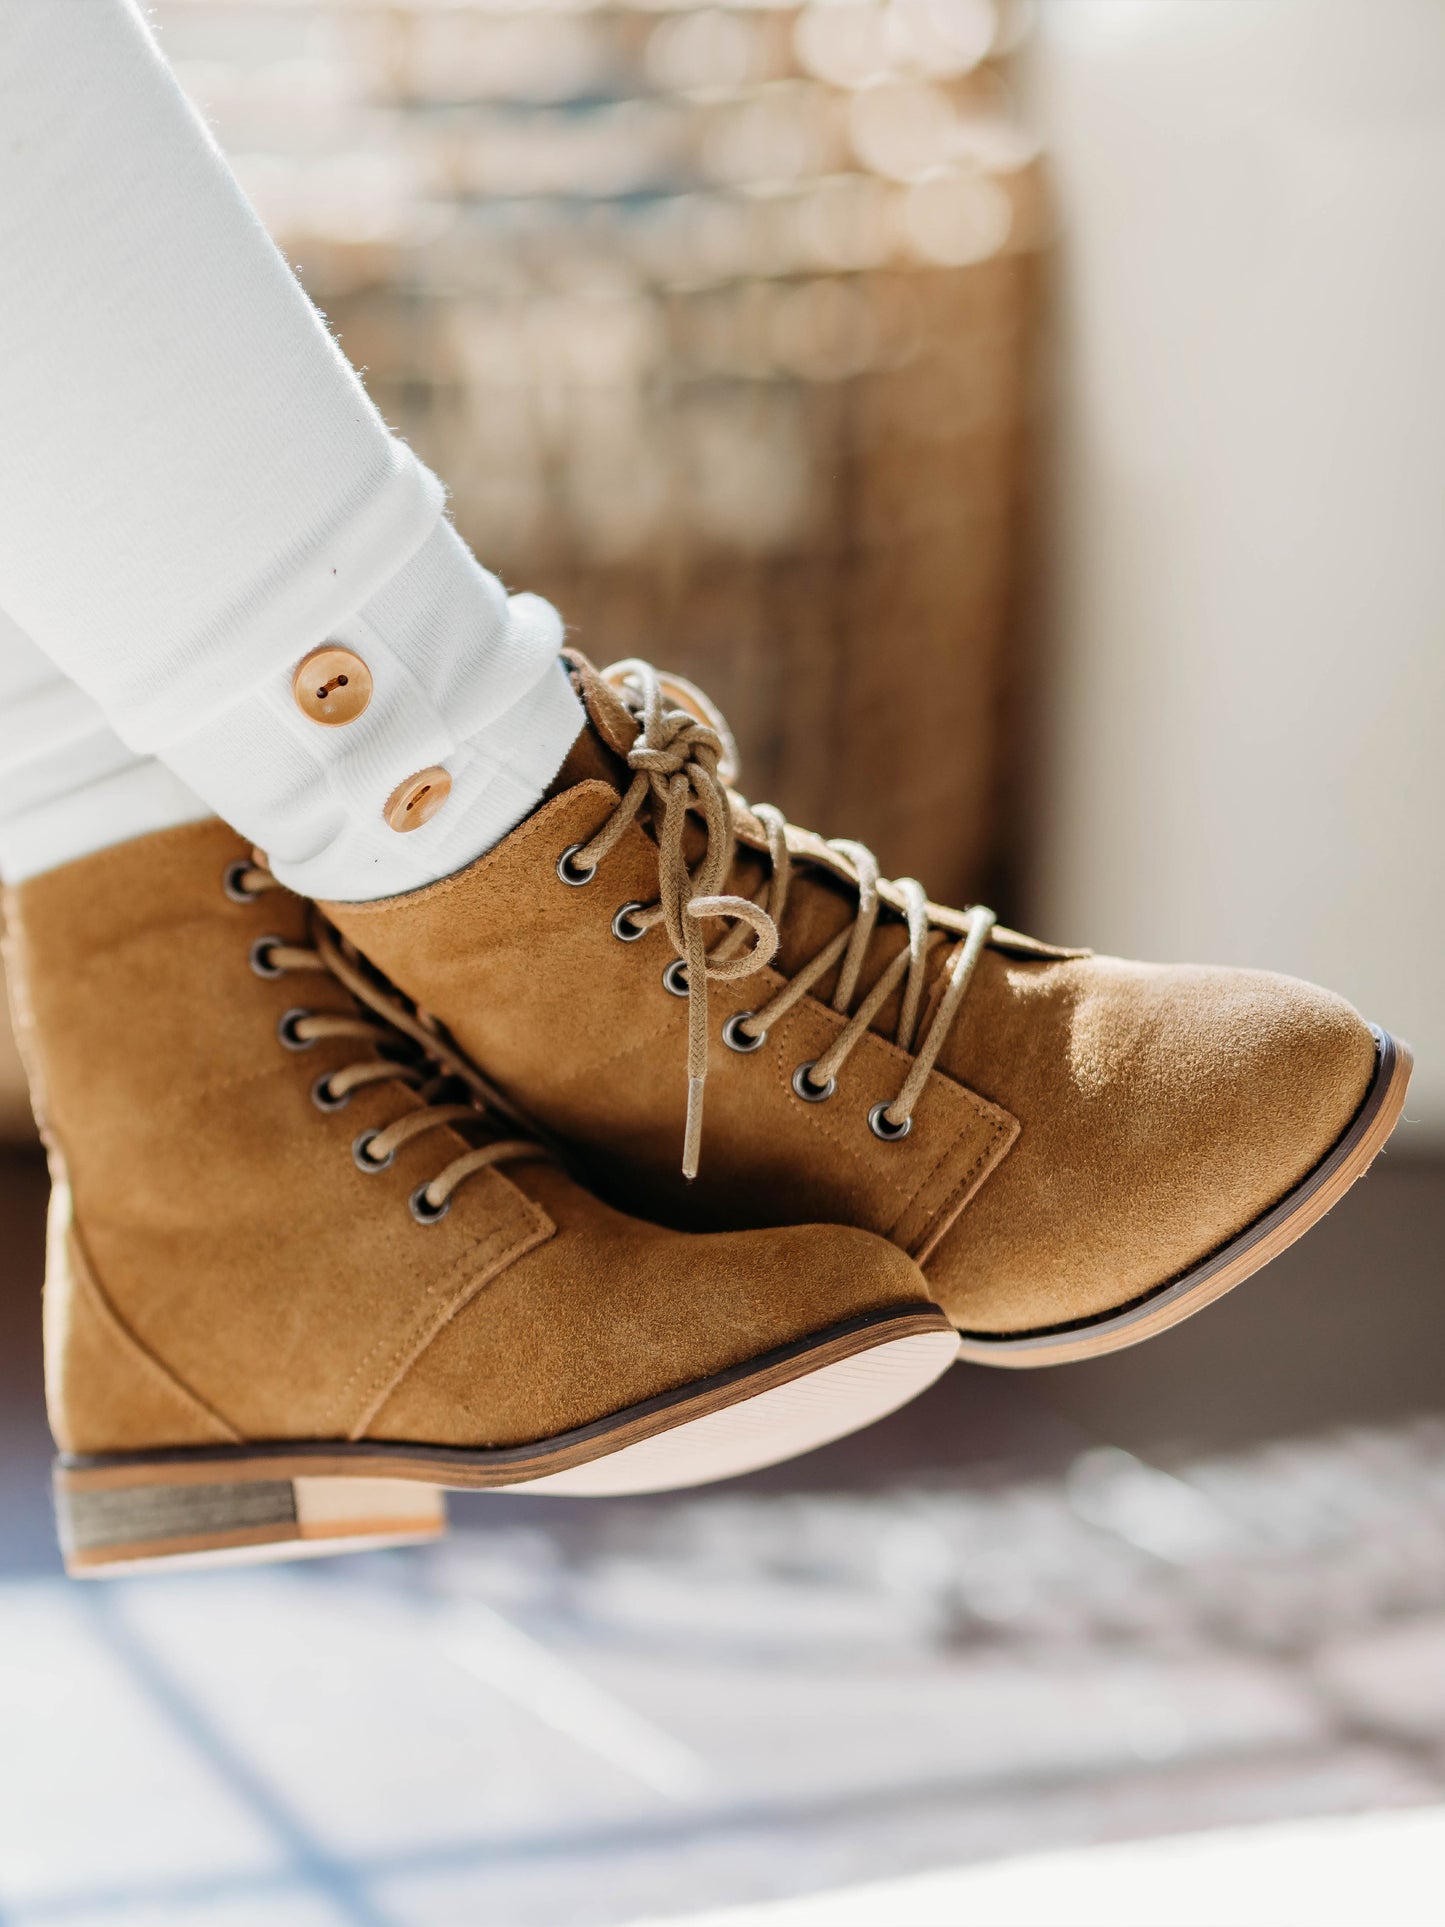 Sharp Boots. This camel suede lace-up boot has a rubber sole, metal eyelets, and nice thick laces. With a design that supports the ankle, these boots are perfect for some outdoor fun. 